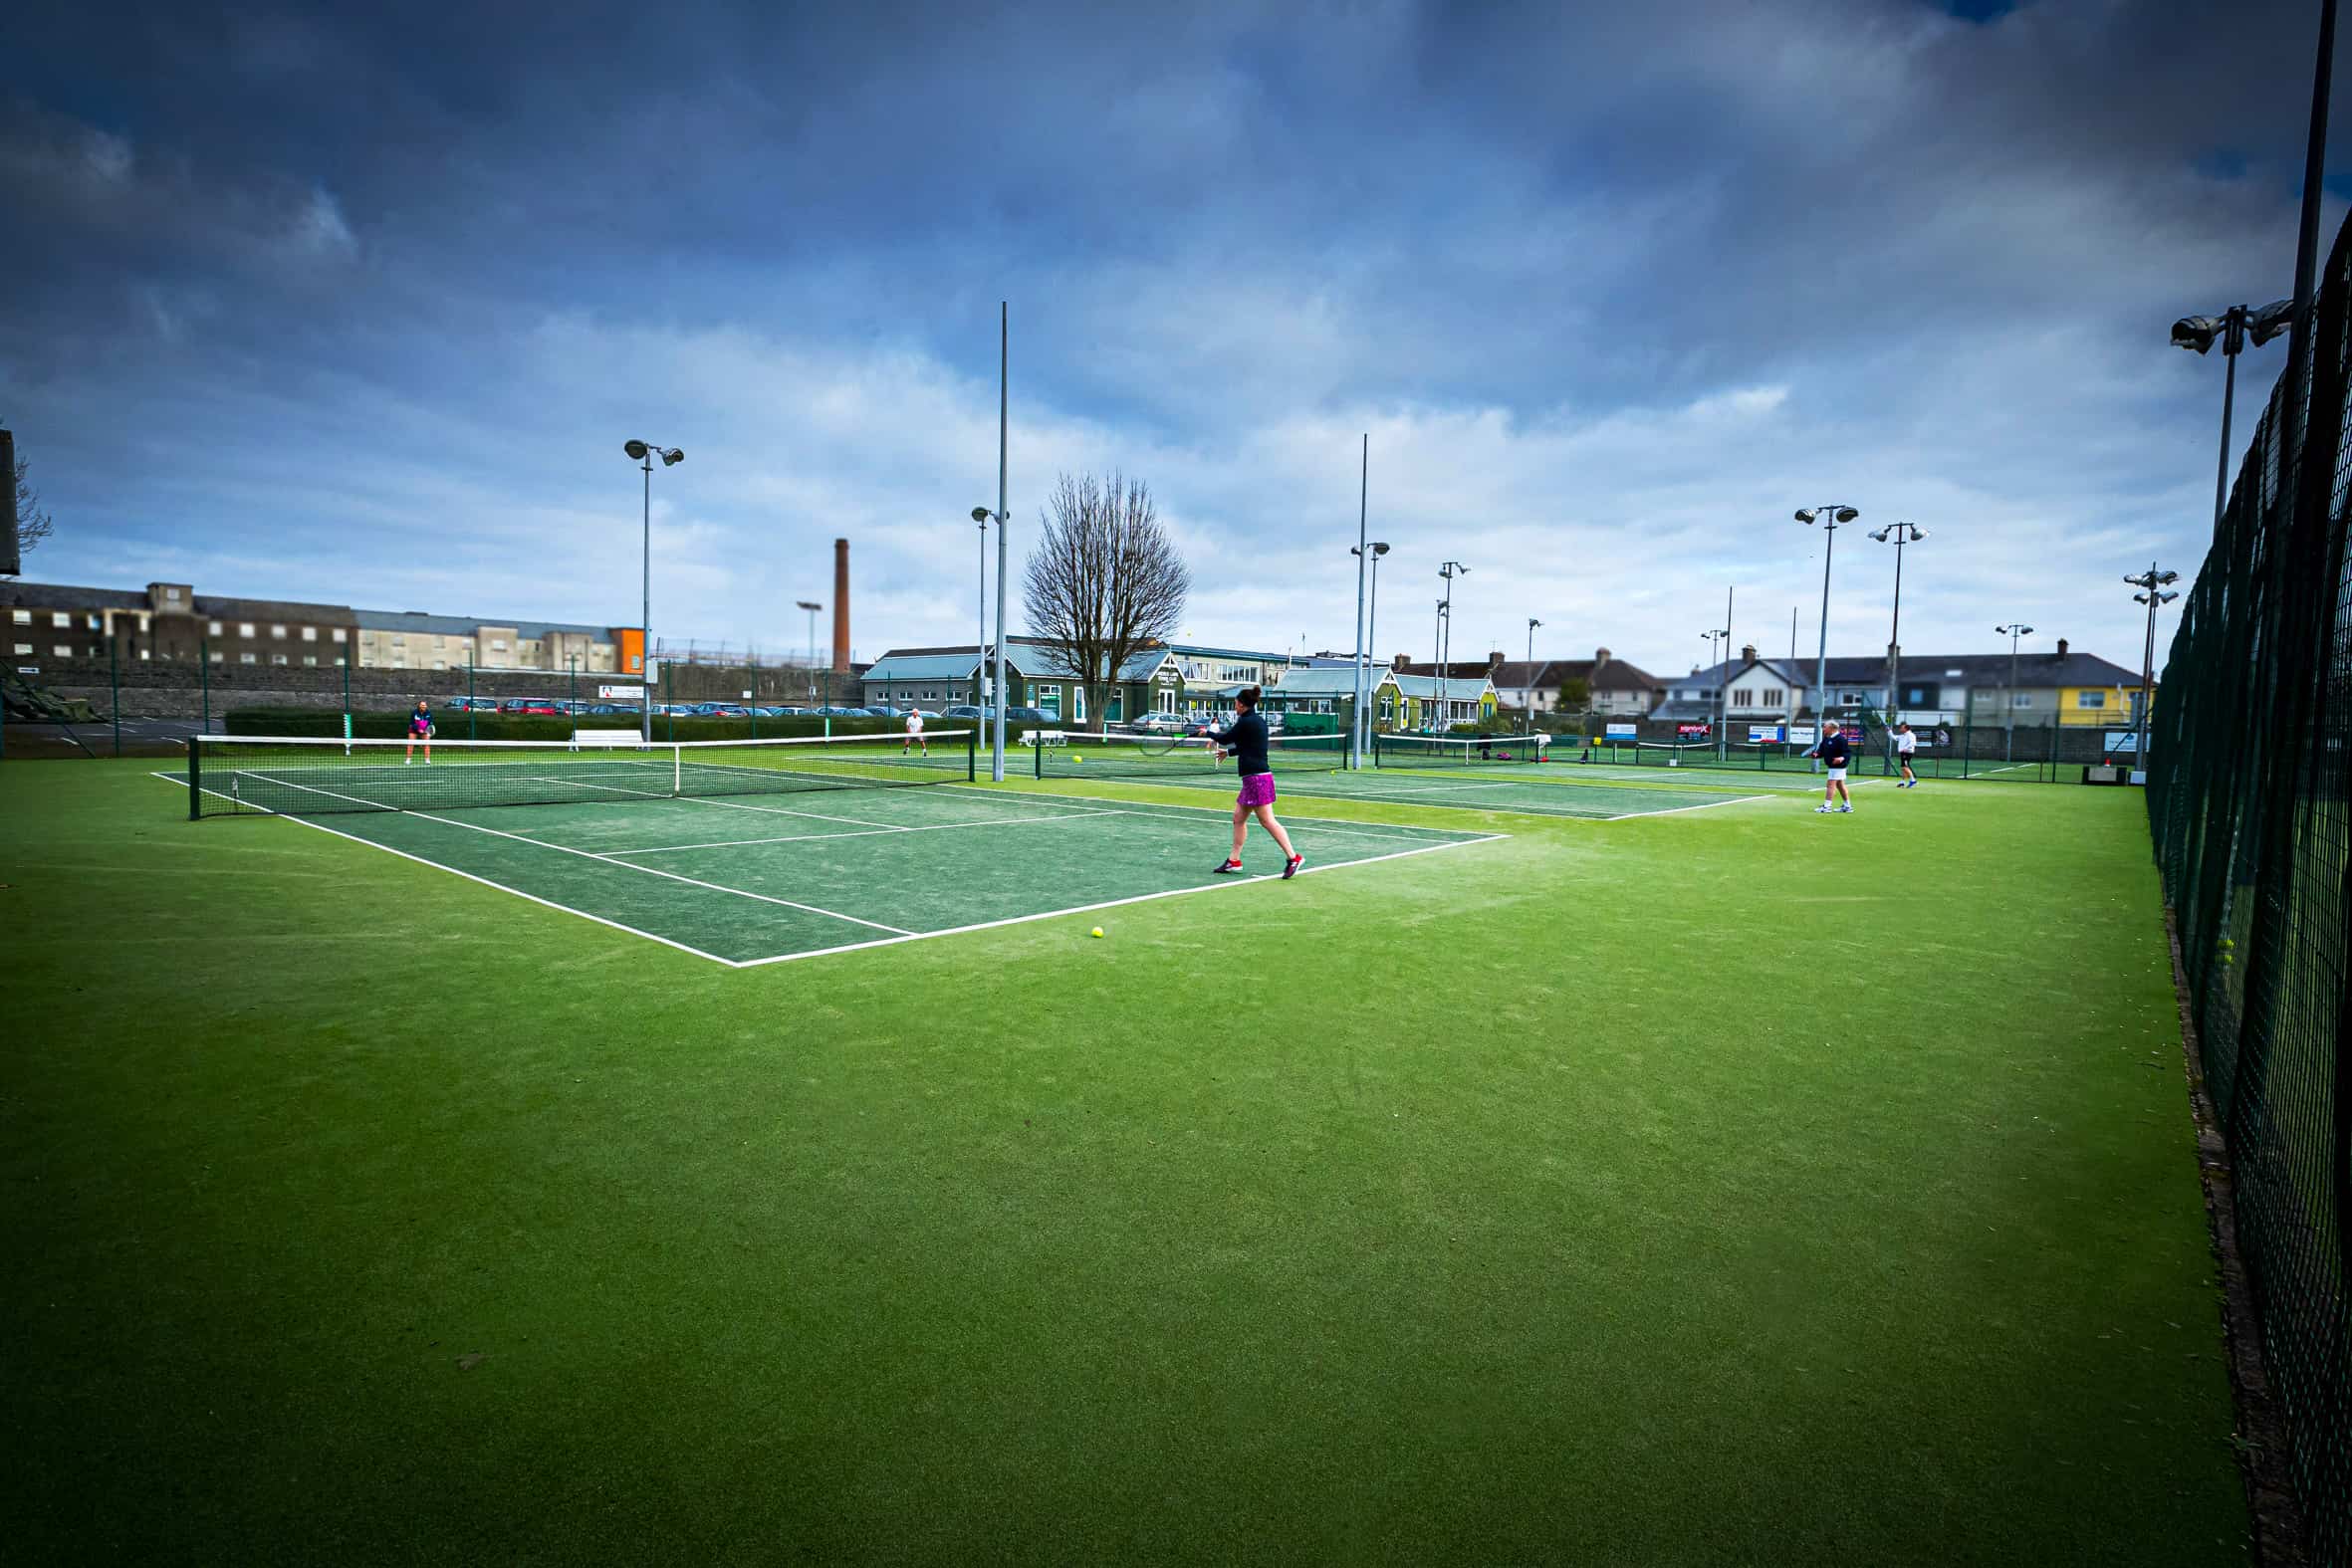 Ciac Tennis Club - We are excited to announce that online entry for The  'Limerick Senior Singles Open' is now open. Visit ti.tournamentsoftware.com  or click the link below